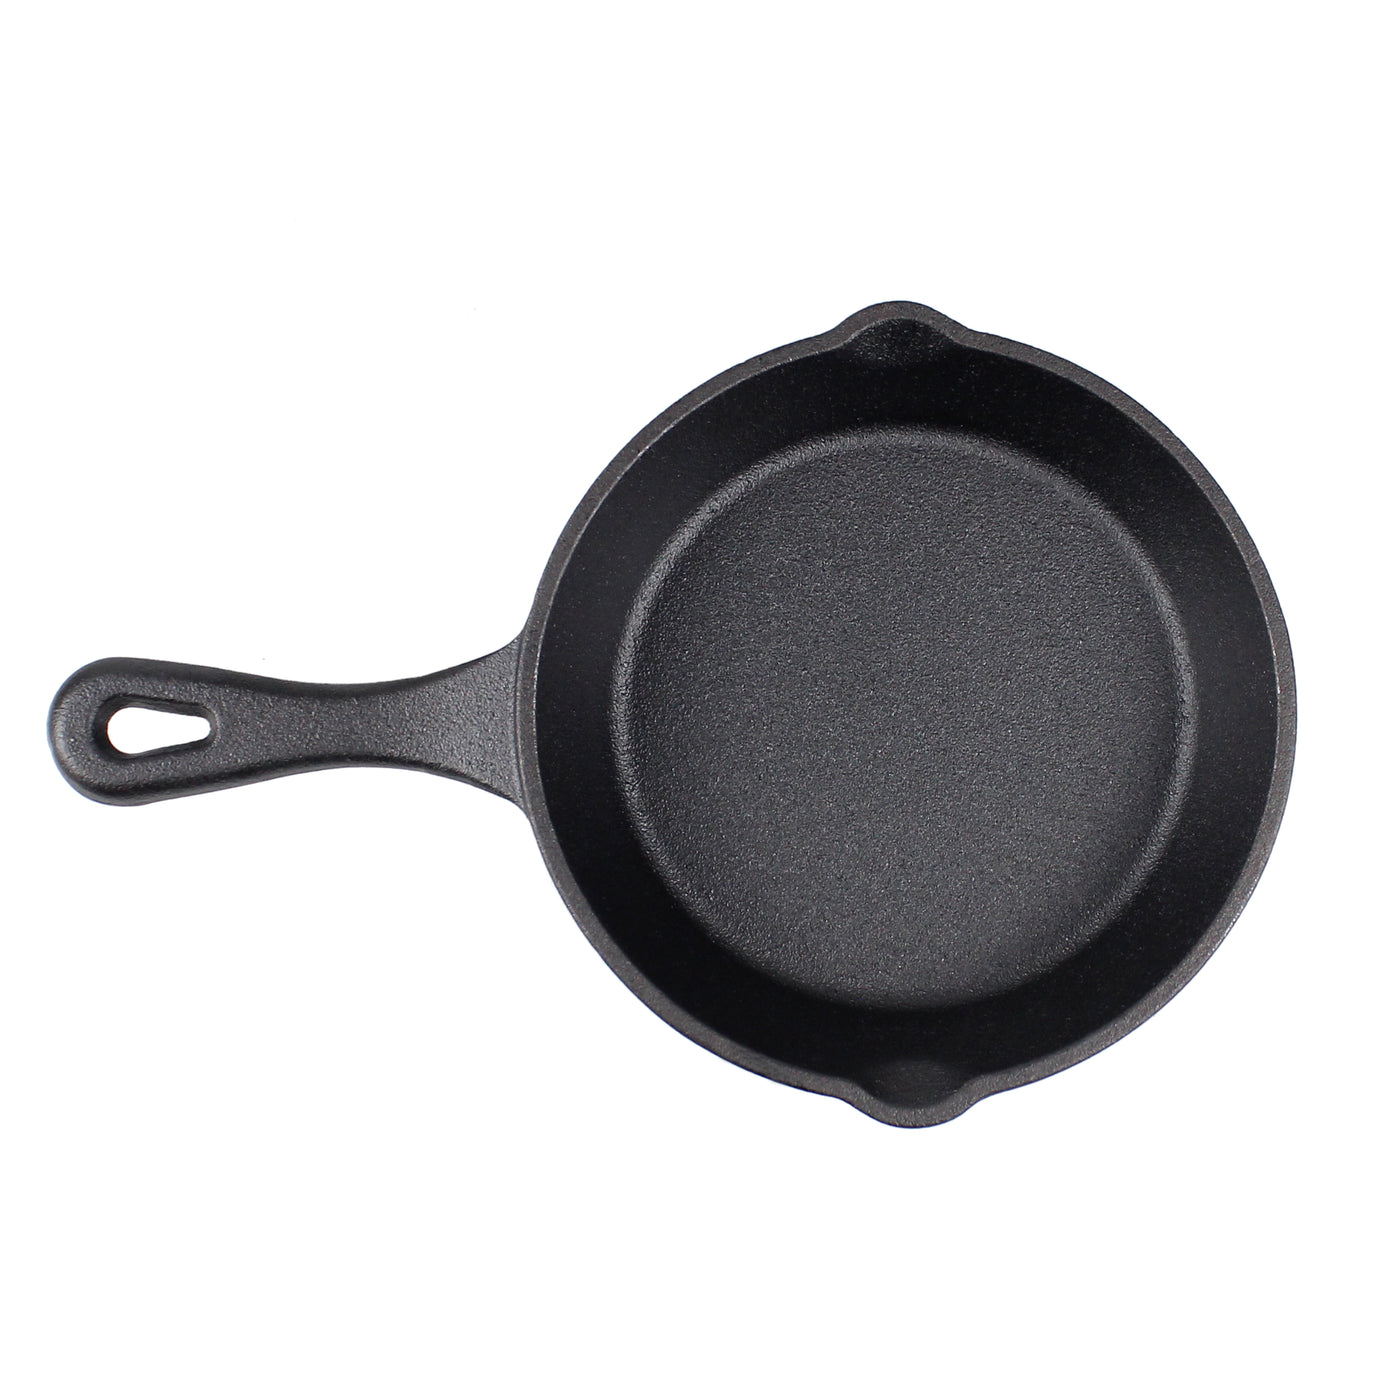 6"-Inch (15 cm) Cast Iron Skillet Set of 2 with 2 Silicon Handle Holder Grips